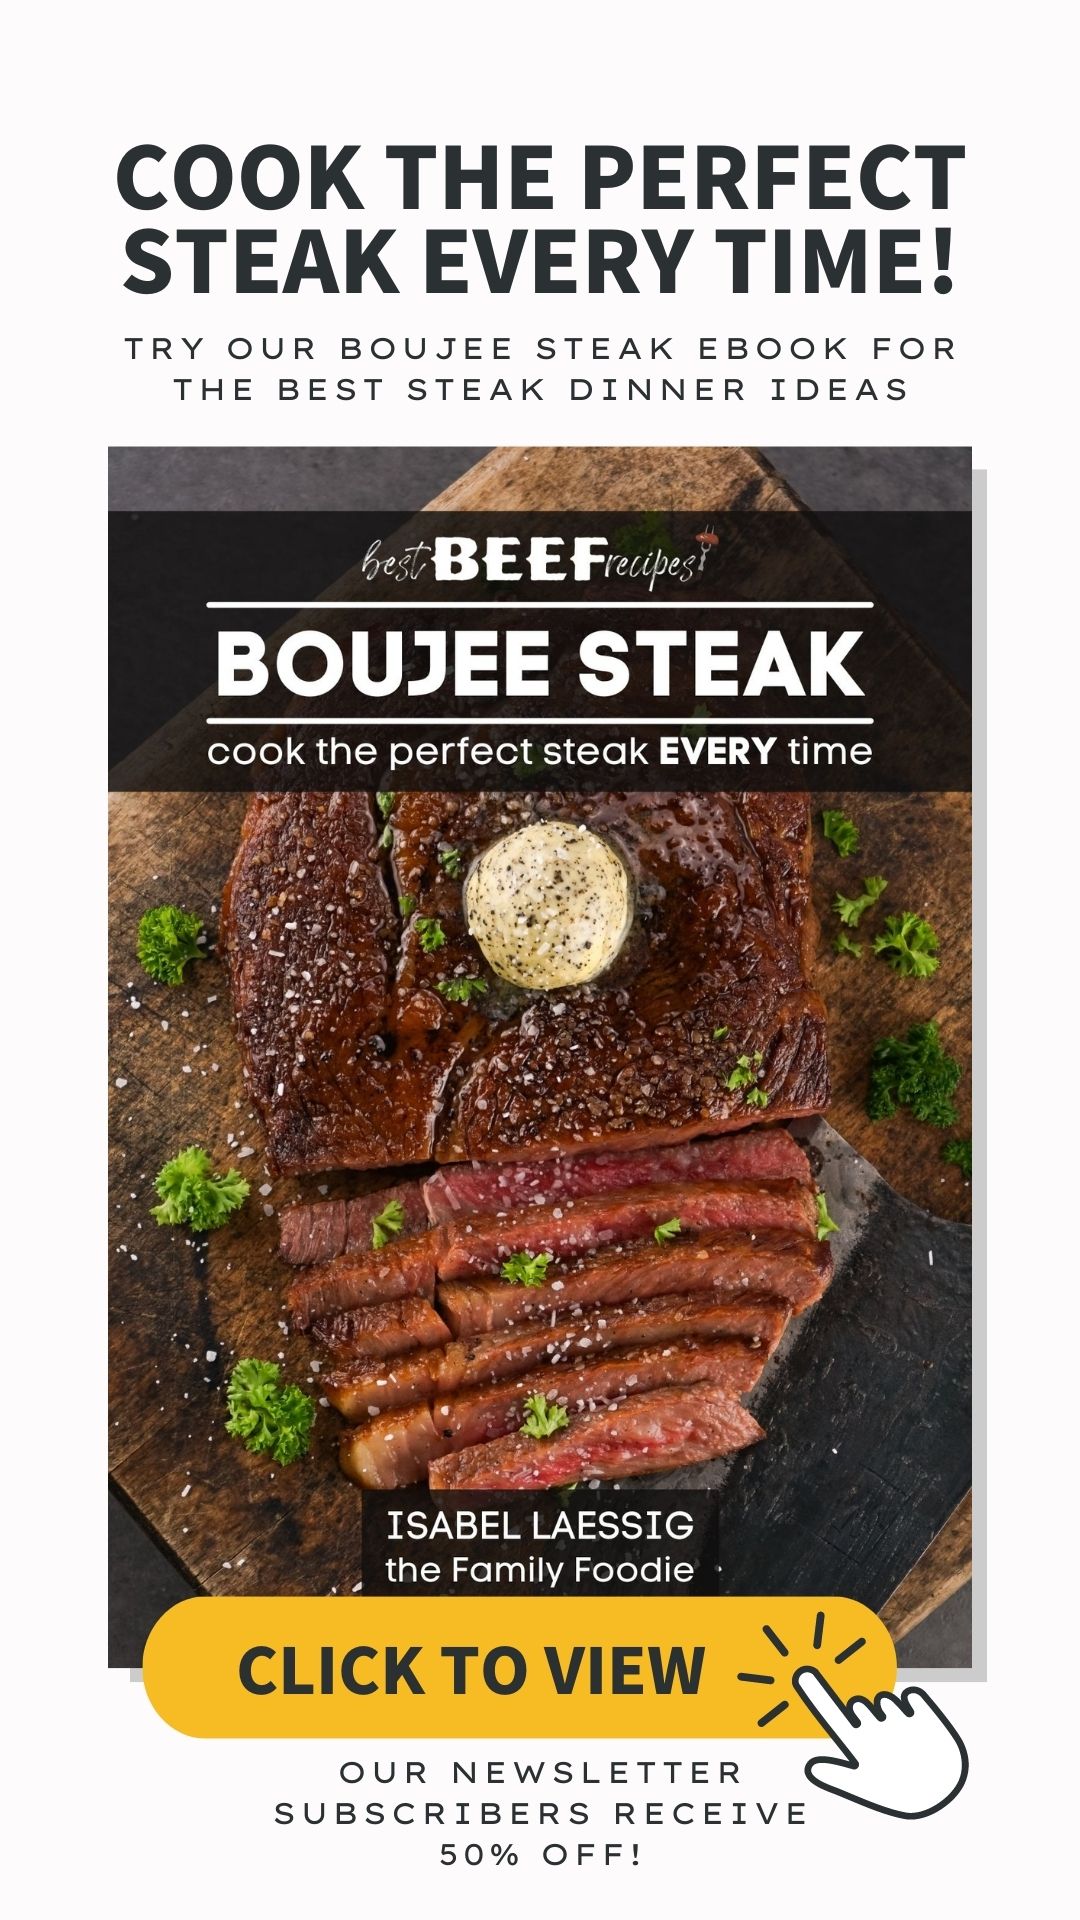 Click to see more about our boujee steak ebook and cook the perfect steak every time!